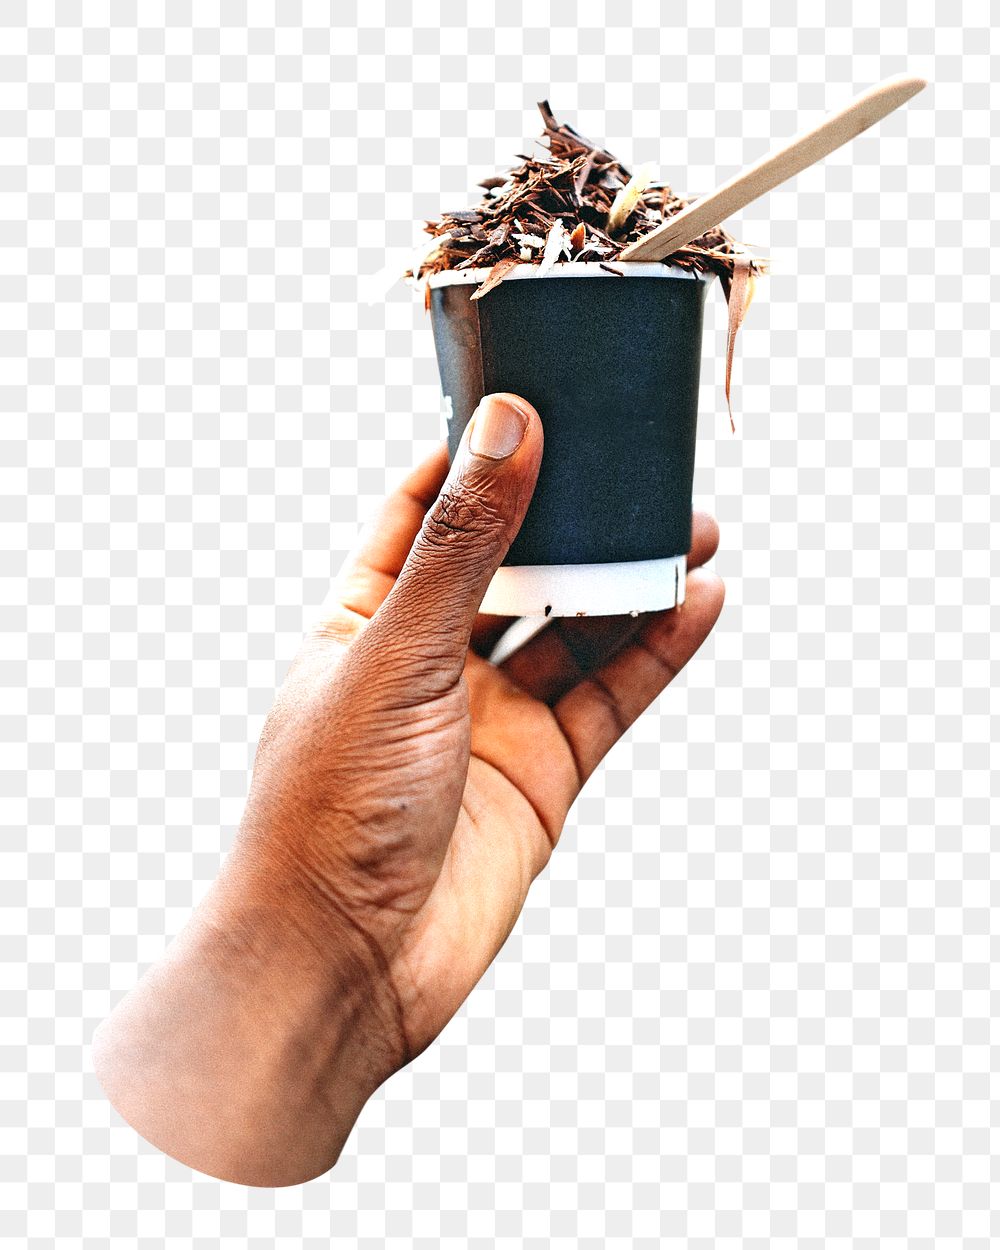 PNG hand holding ice cream, collage element, transparent background